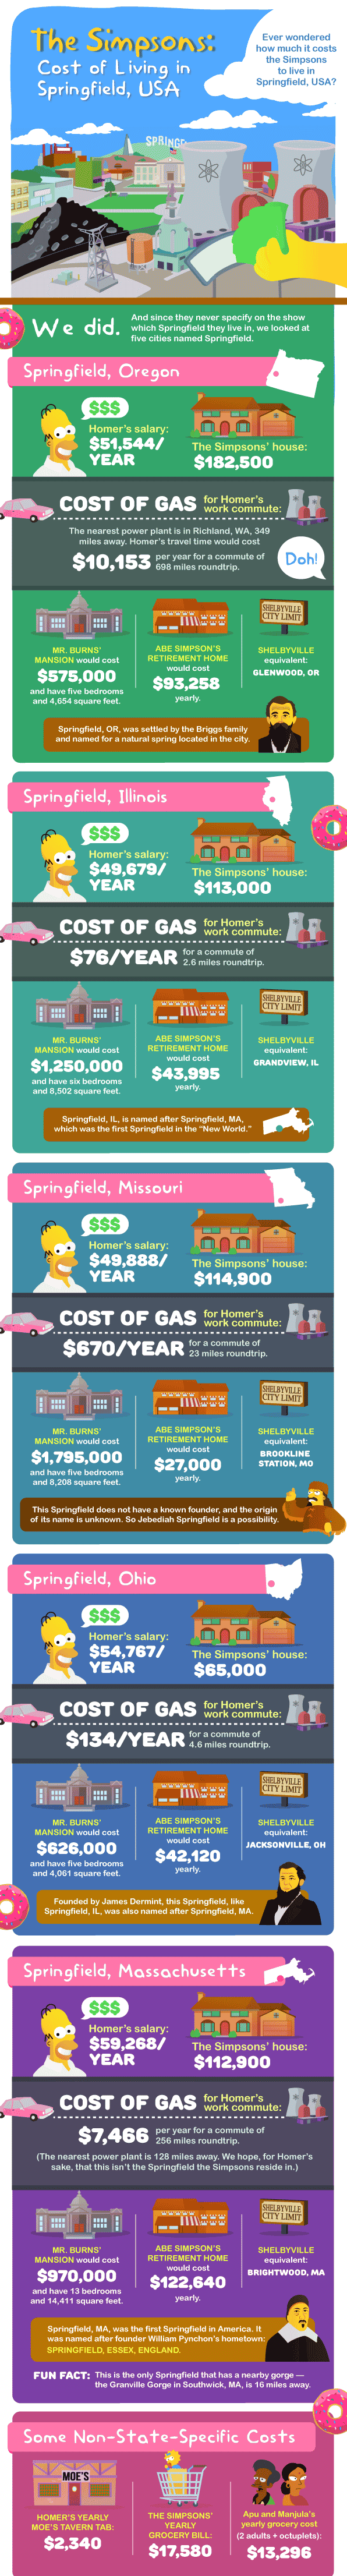 Ever wondered how much it costs the Simpsons to live in Springfield, USA? We did.  And since they never specify on the show which Springfield they live in, we looked at the top five cities (by population) named Springfield, plus one more Springfield that Matt Groening has alluded might actually be where the Simpsons live. These Springfields are:  Springfield, Oregon Springfield, Illinois Springfield, Missouri Springfield, Ohio Springfield, Massachusetts